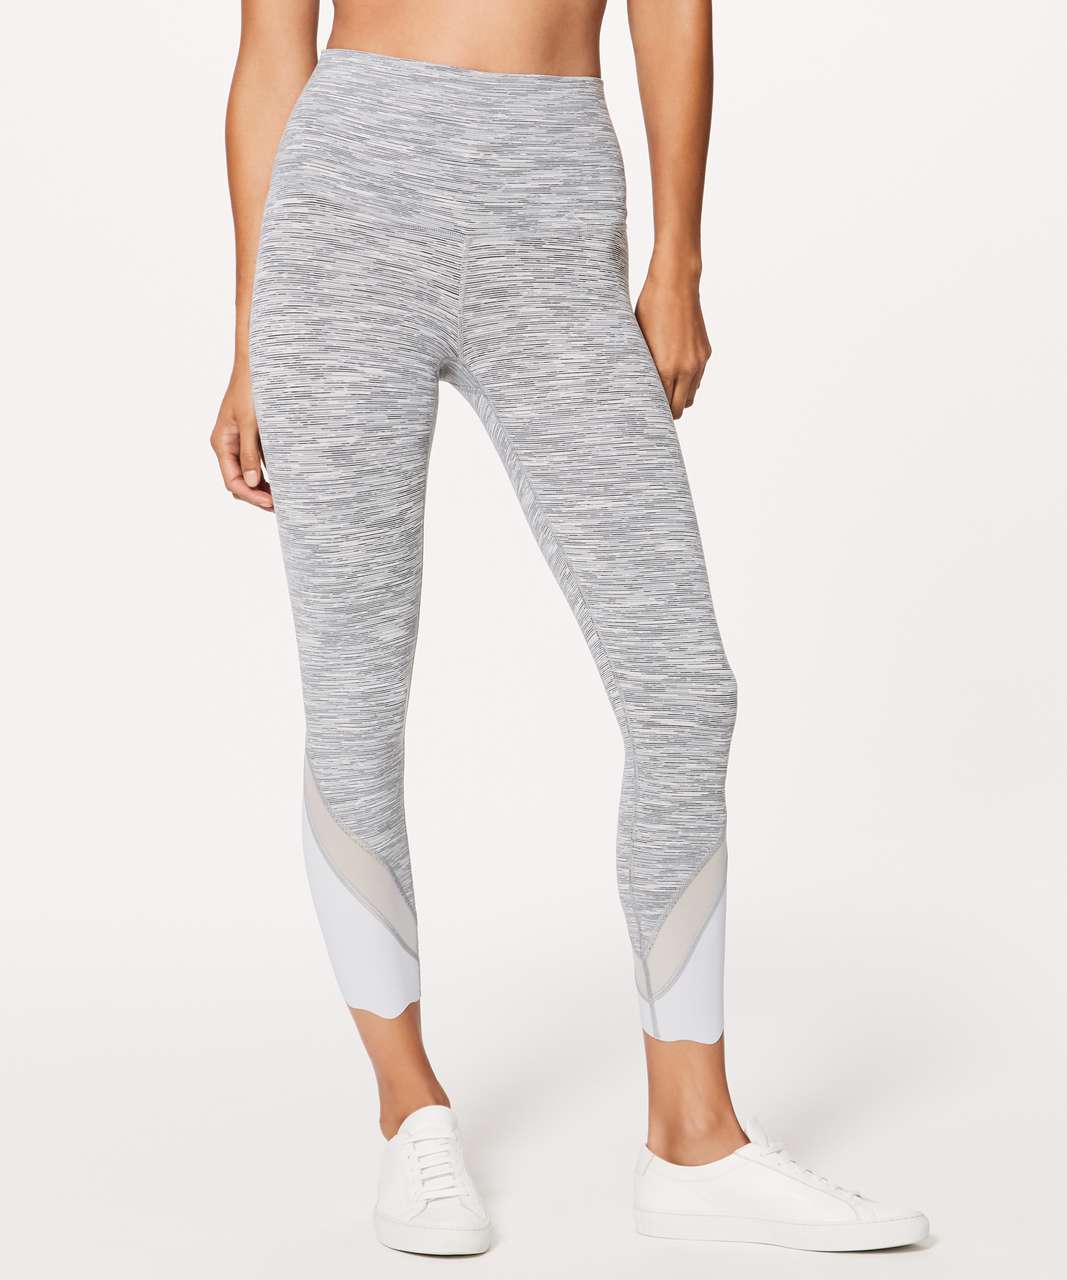 Lululemon Wunder Under Crop II (Special Edition) *Scallop 23" - Wee Are From Space Silver Spoon / Silver Spoon